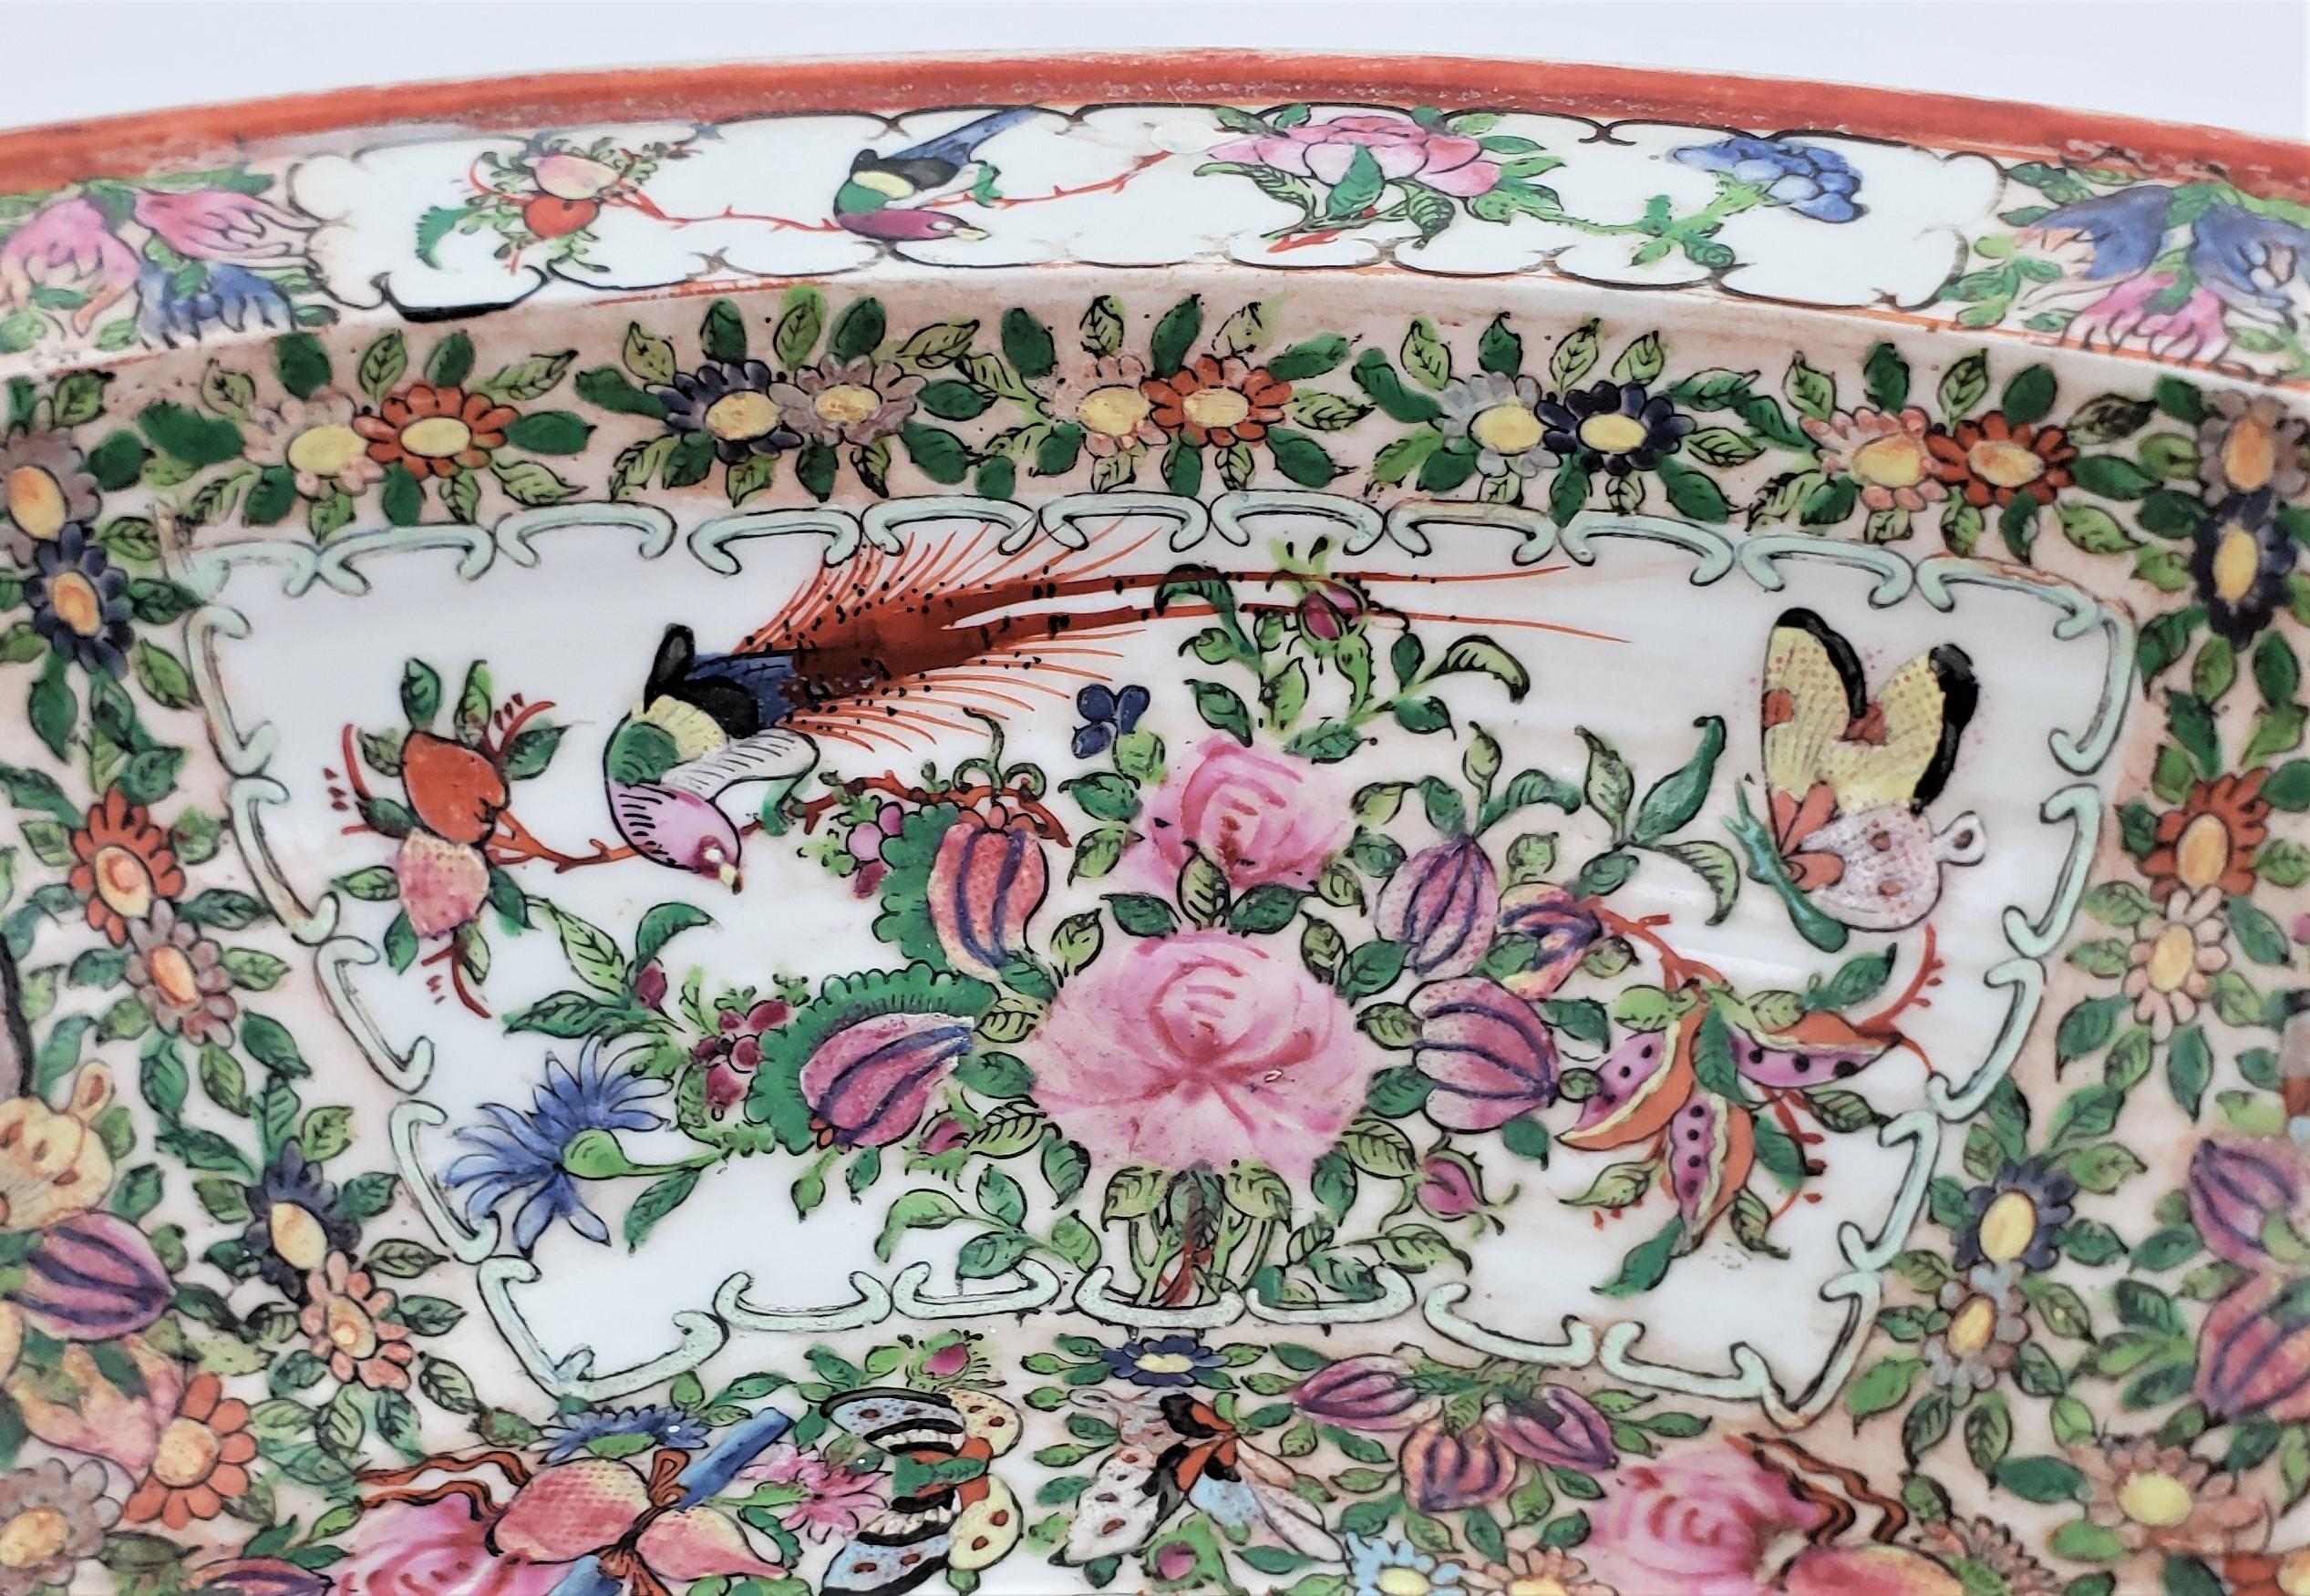 Large Antique Qing Dynasty Famille Rose Elaborately Hand-Painted Bowl or Basin In Good Condition For Sale In Hamilton, Ontario